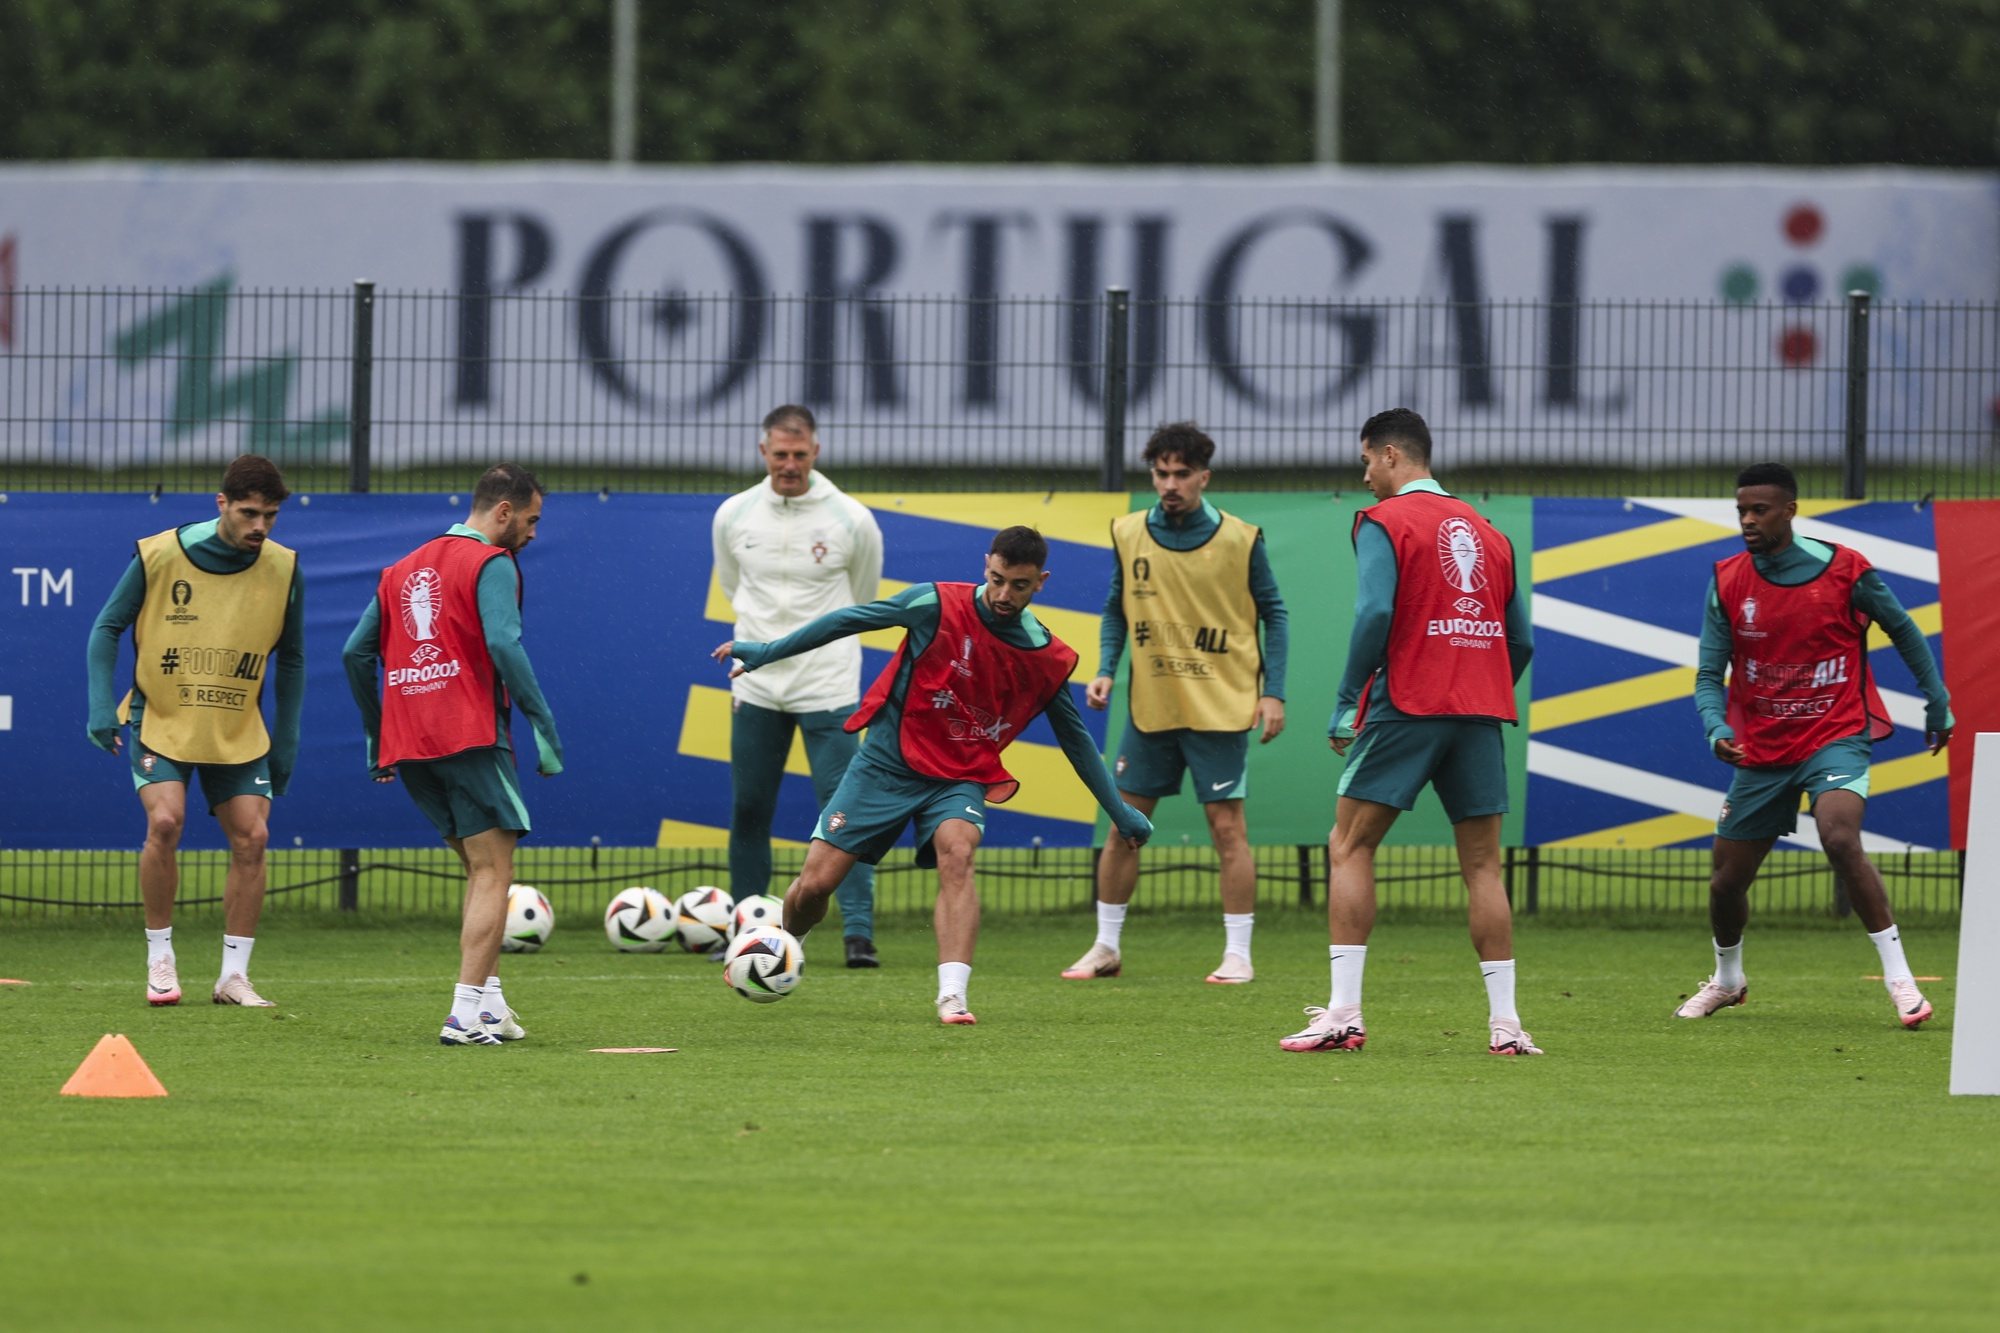 Portugal national soccer team players during a training session in Marienfeld, Harsewinkel, Germany, 30 June 2024. The Portuguese national soccer team is based in Marienfeld, Harsewinkel during the UEFA EURO 2024. MIGUEL A. LOPES/LUSA